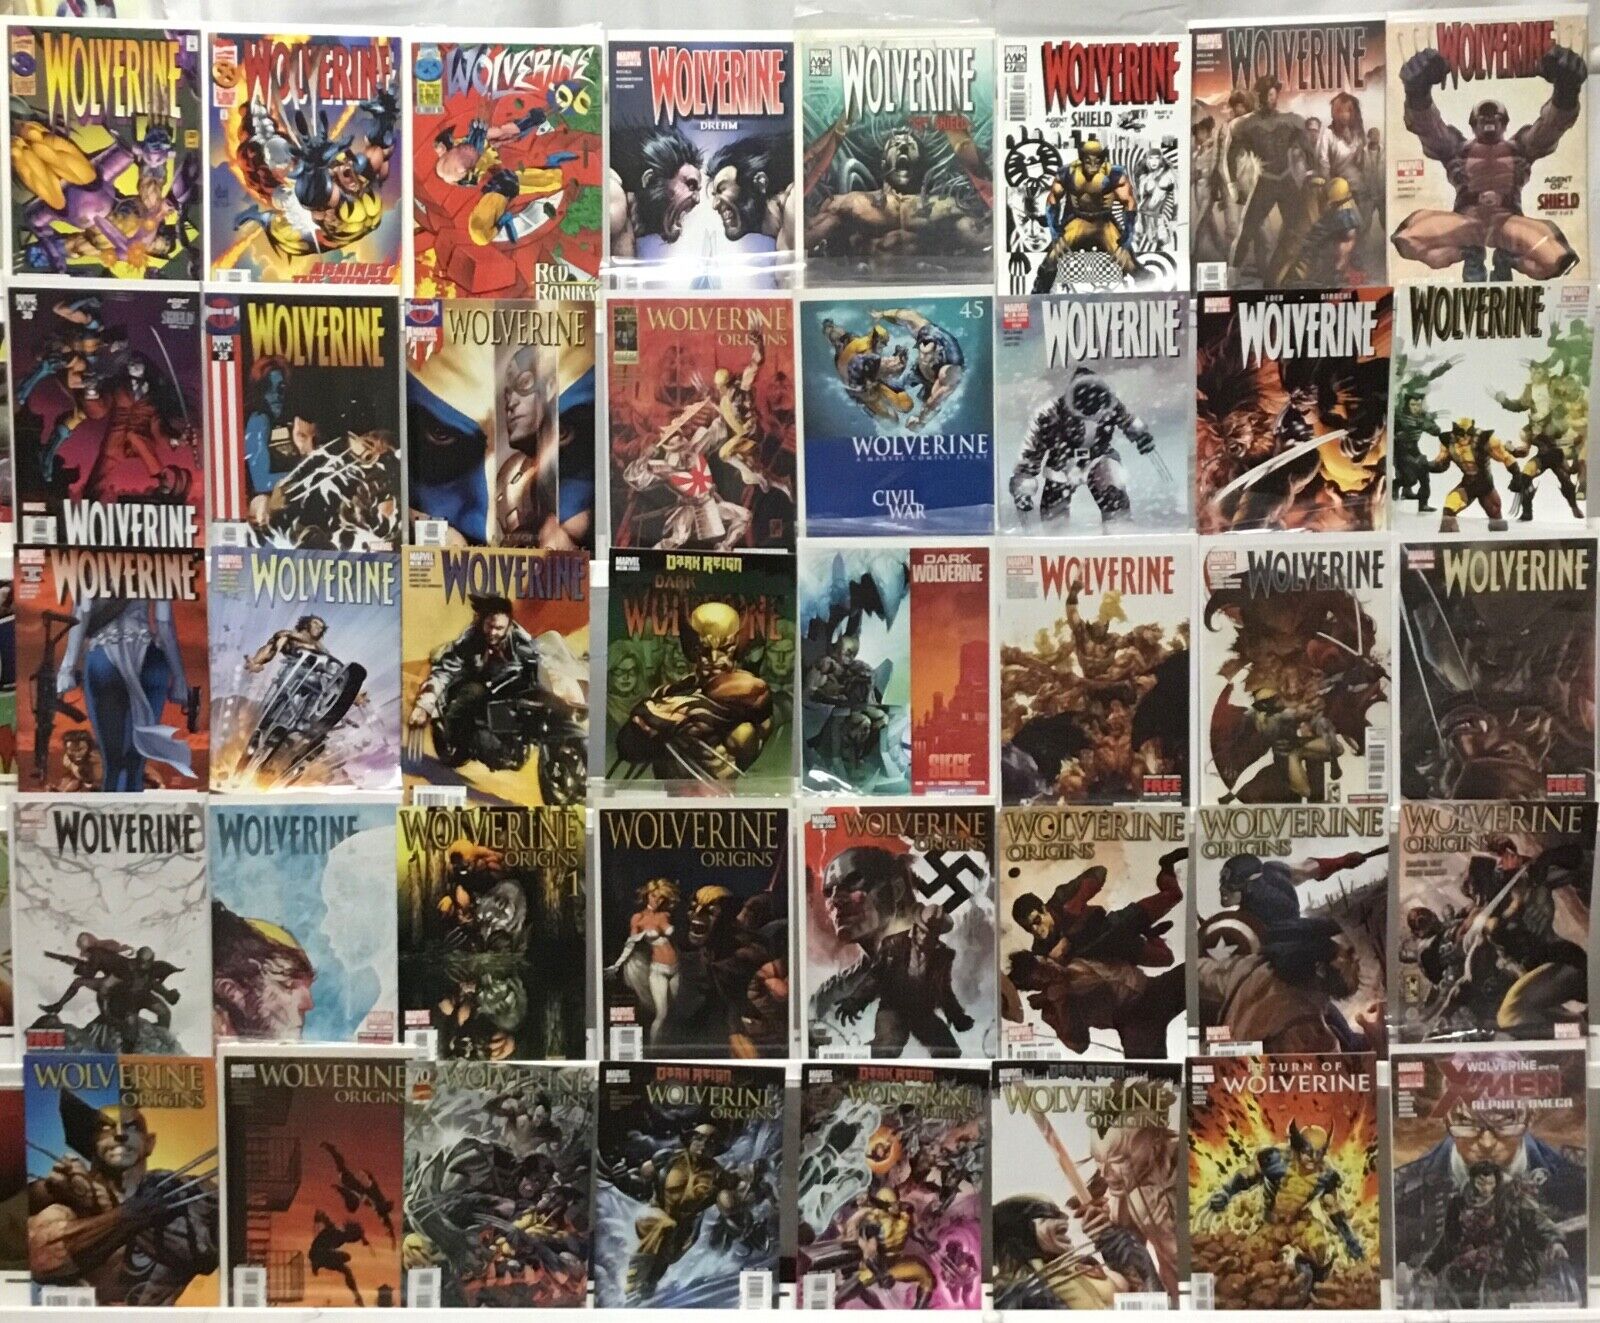 Marvel Comics - Wolverine - Comic Book Lot of 40 Issues